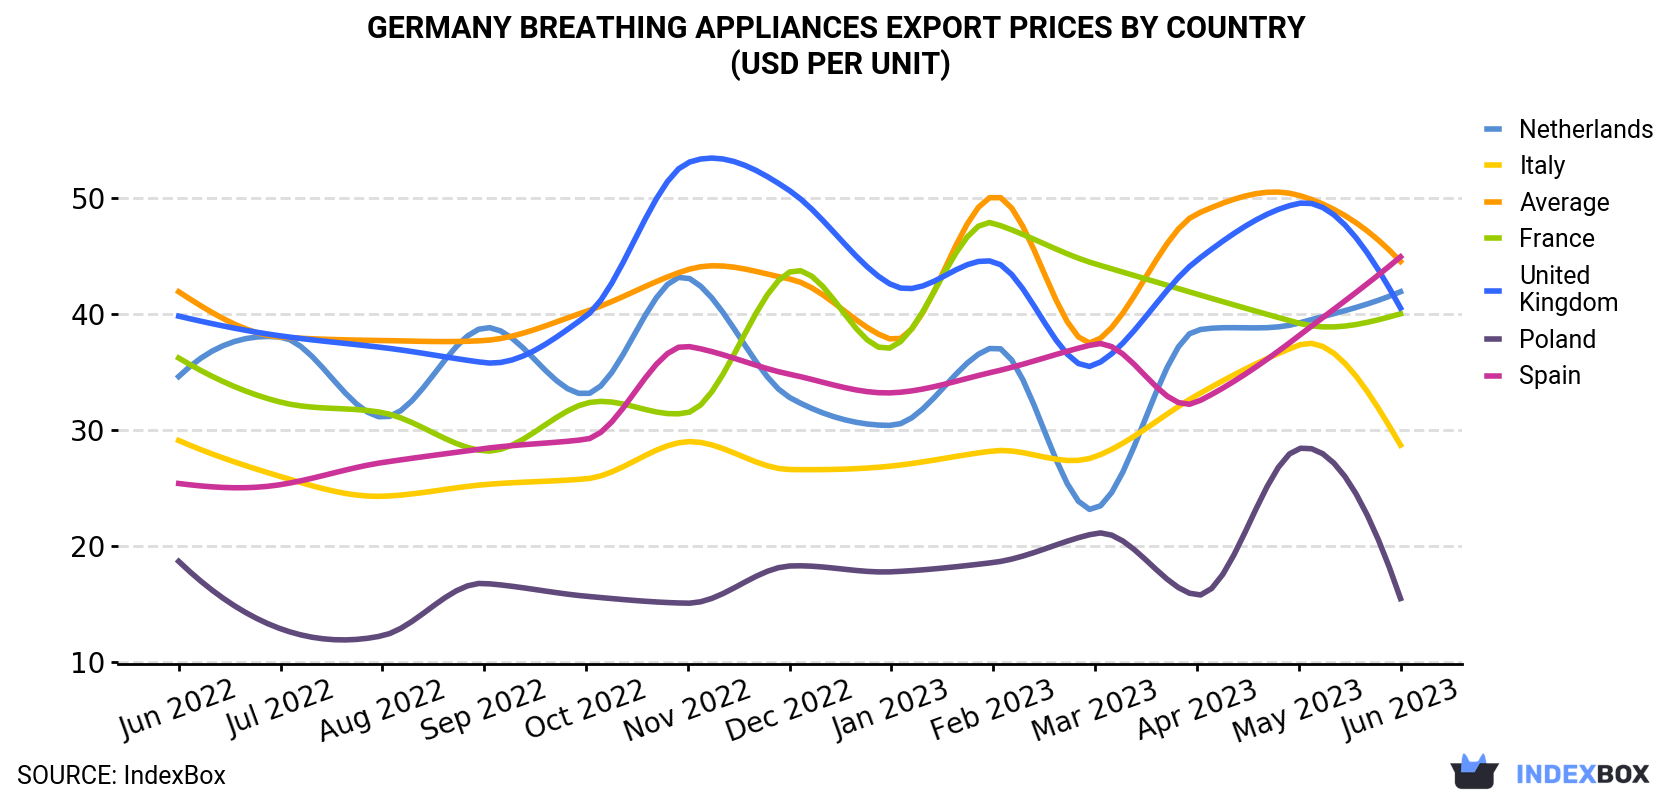 Germany Breathing Appliances Export Prices By Country (USD Per Unit)